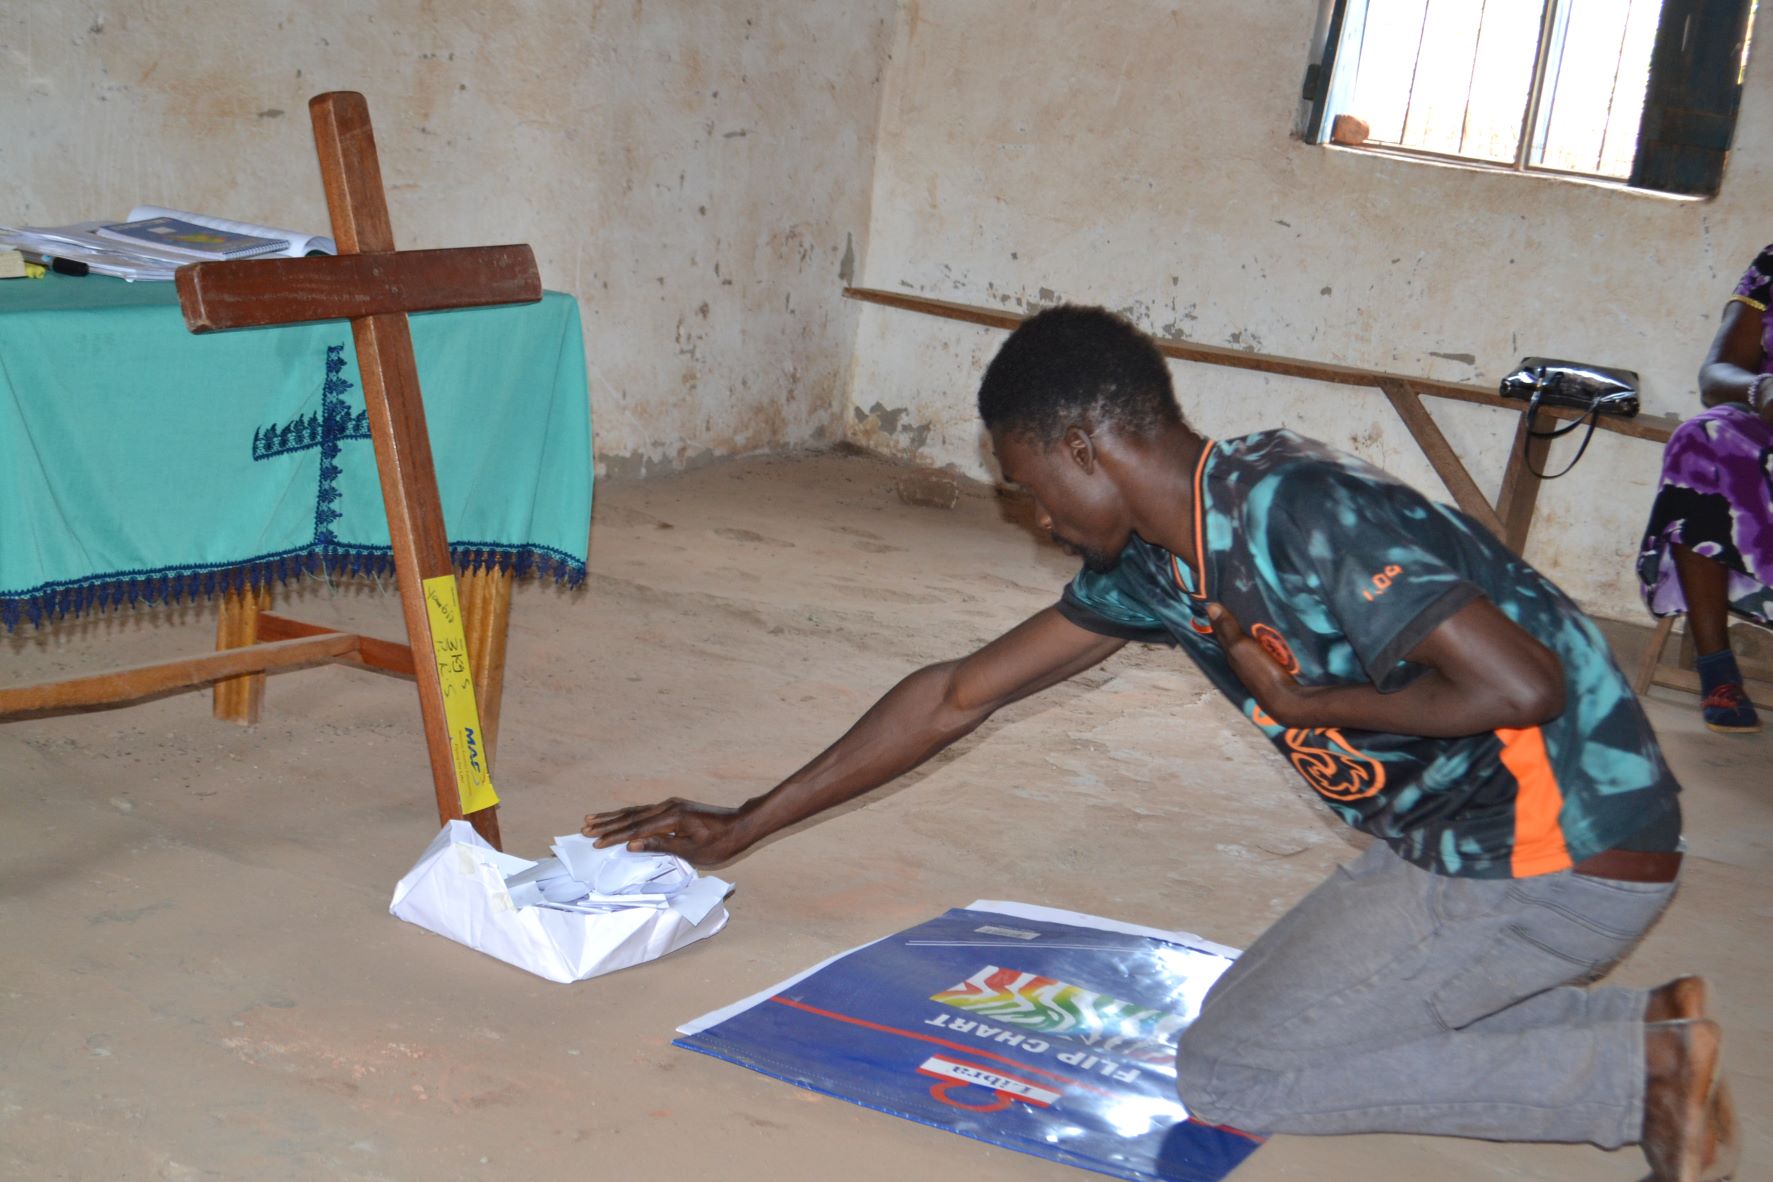 A participant during the practicum workshop gives over his pain to Jesus.